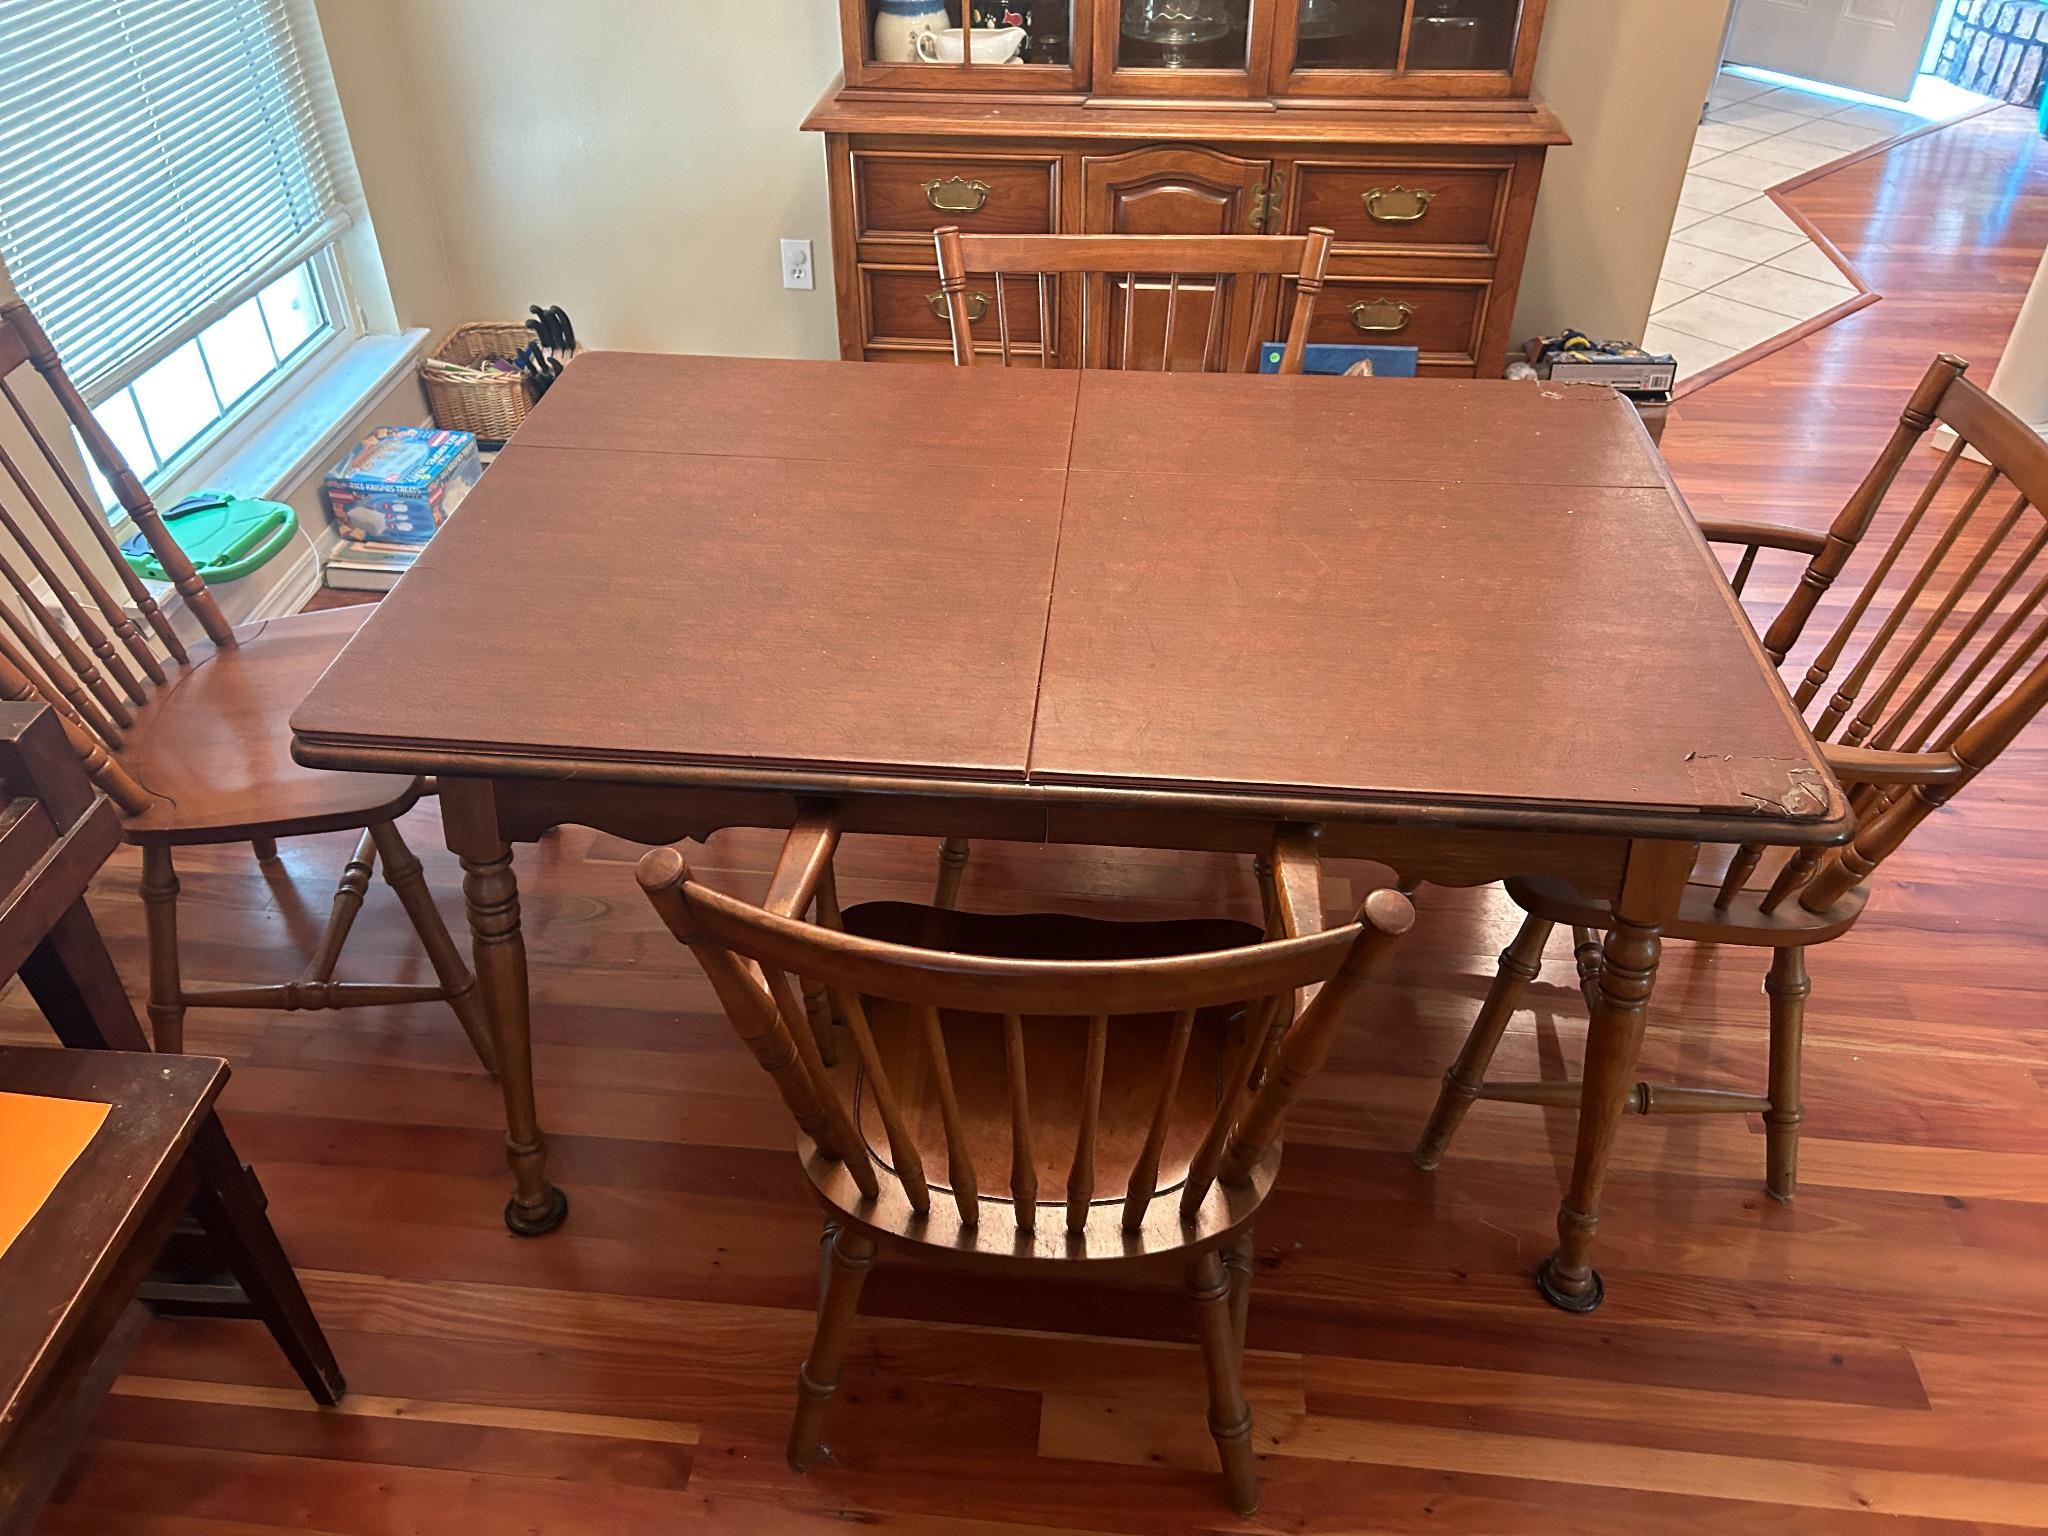 Vintage Oak Dining Table: (4)Chairs, (2) leaves, T